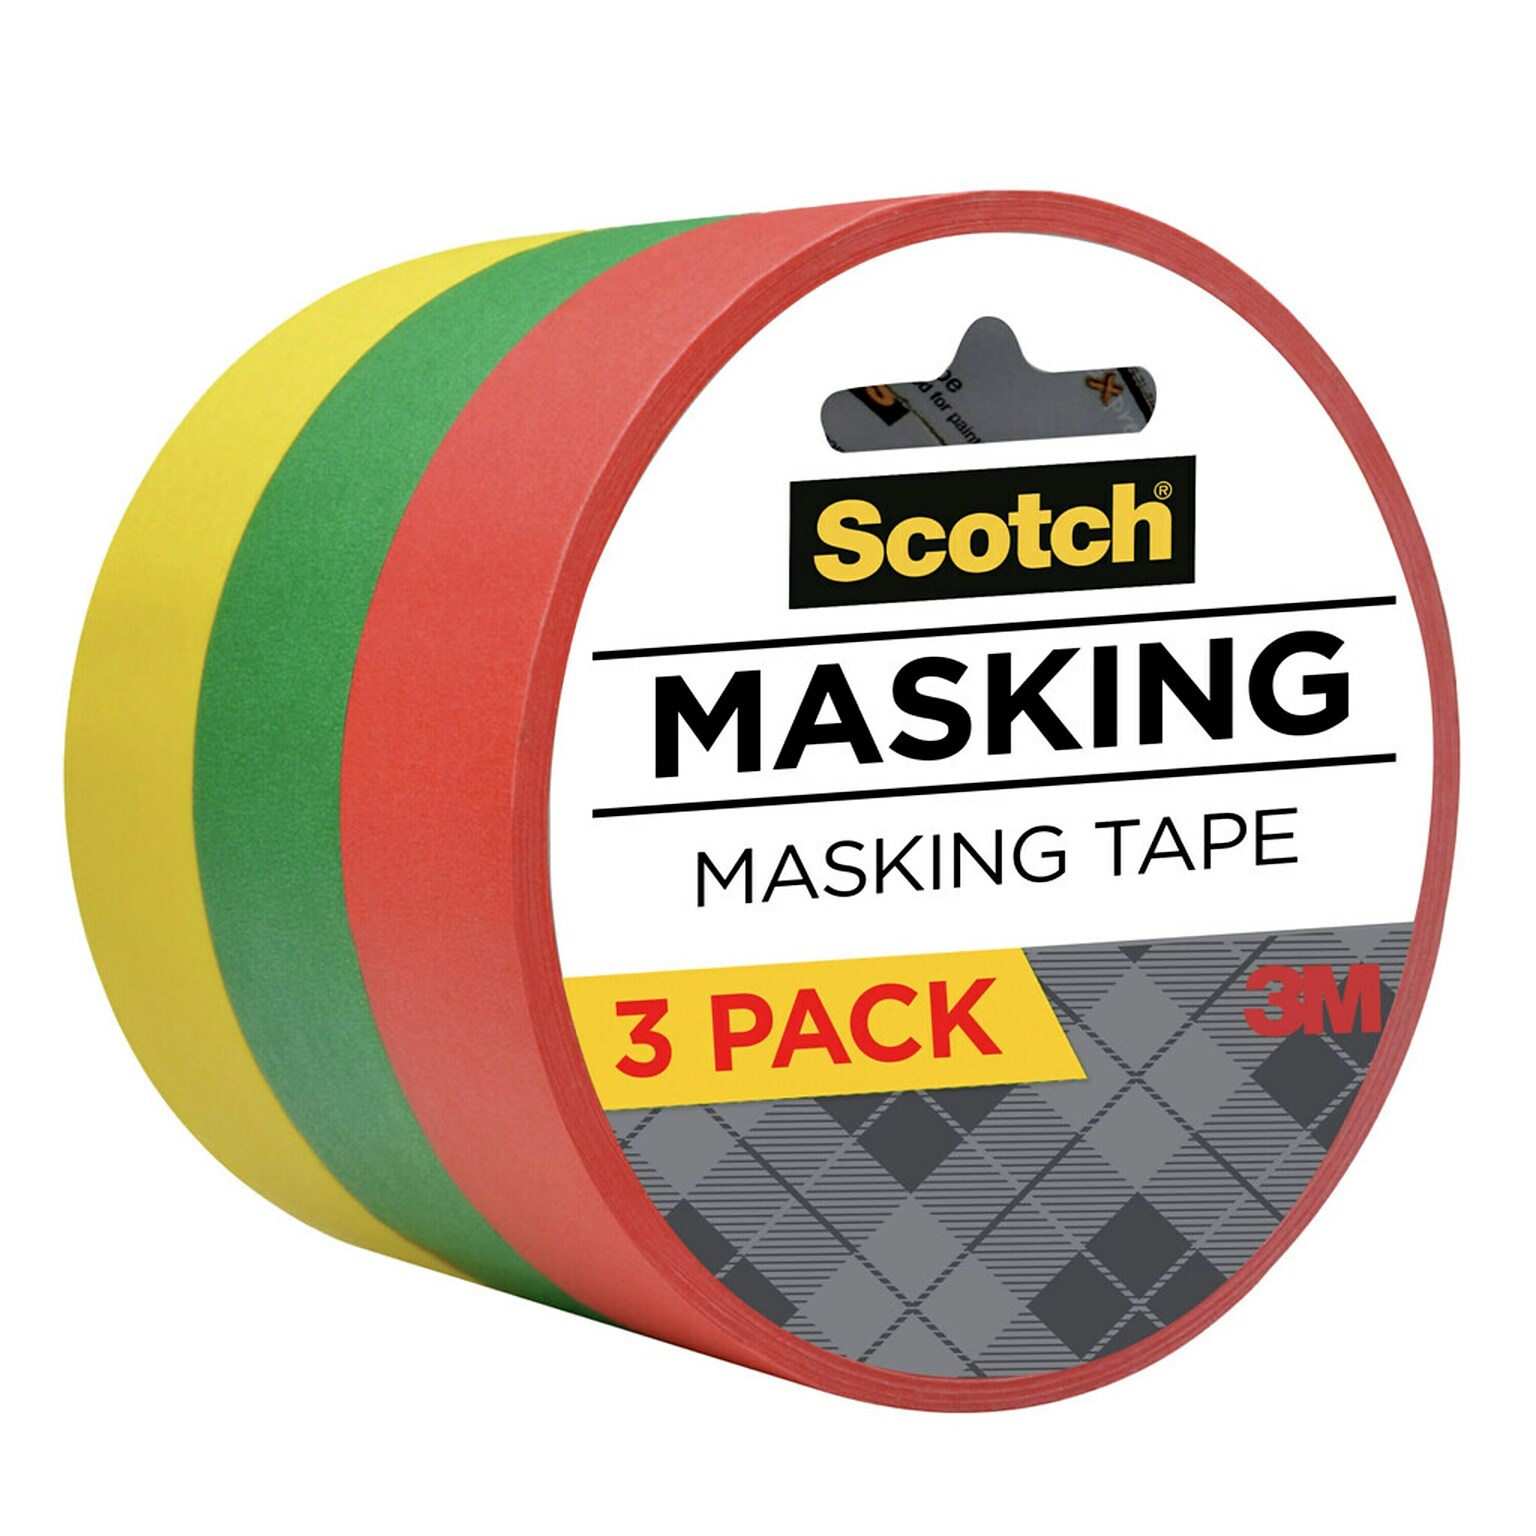 Scotch Expressions Light Masking Tape, 0.94 x 20 yds., Yellow/Green/Red, 3/Pack (3437-3PRM)